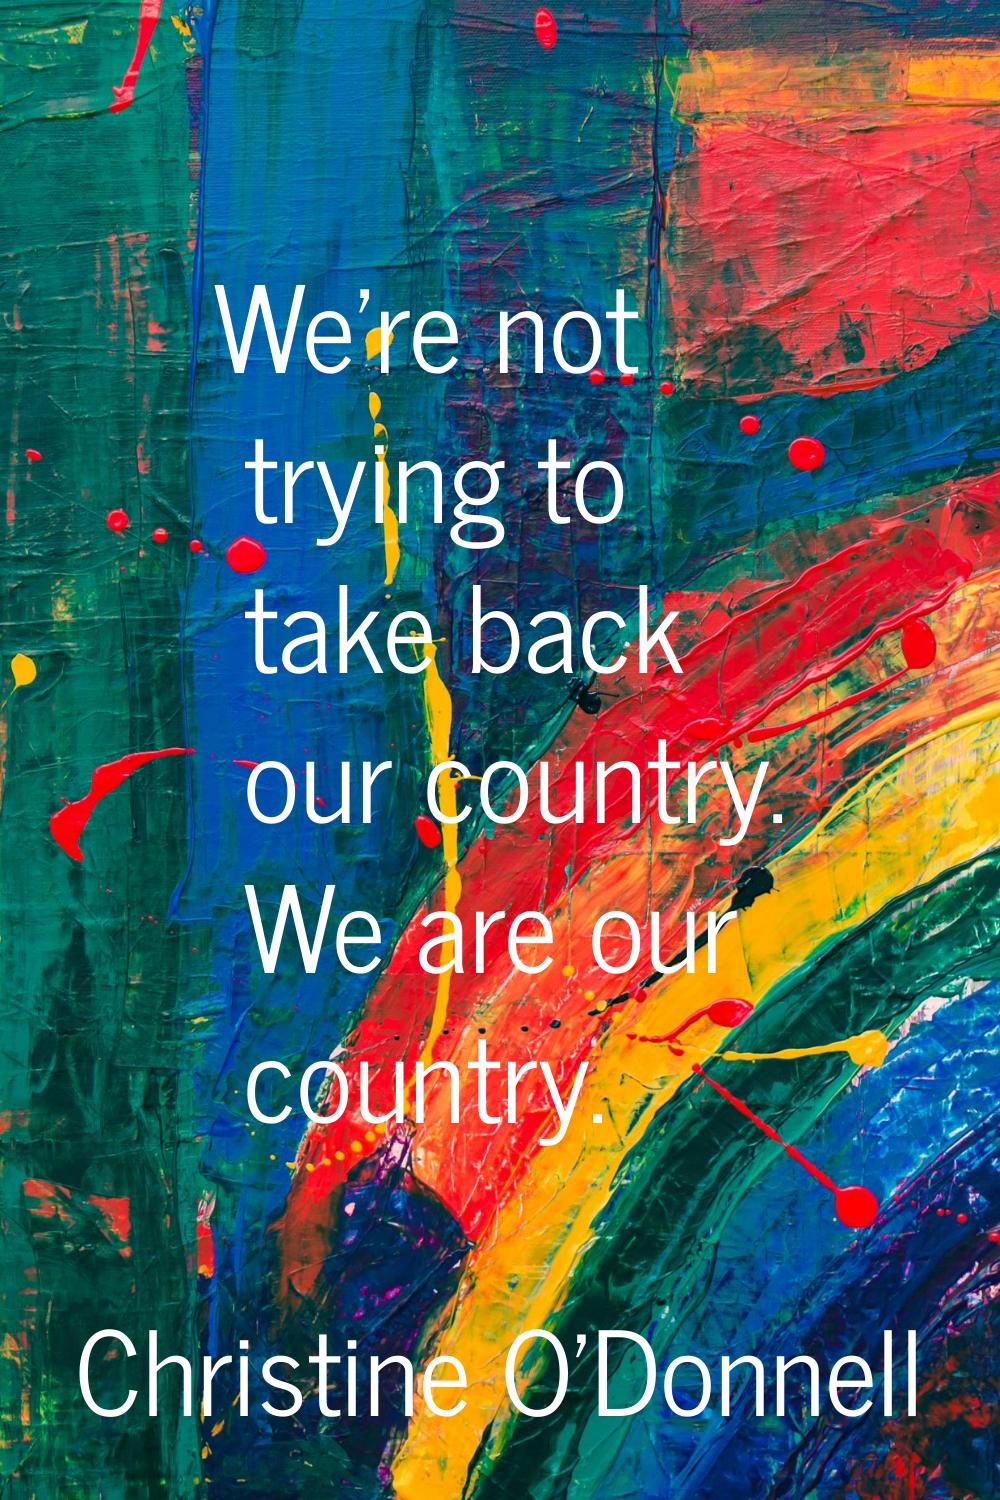 We're not trying to take back our country. We are our country.